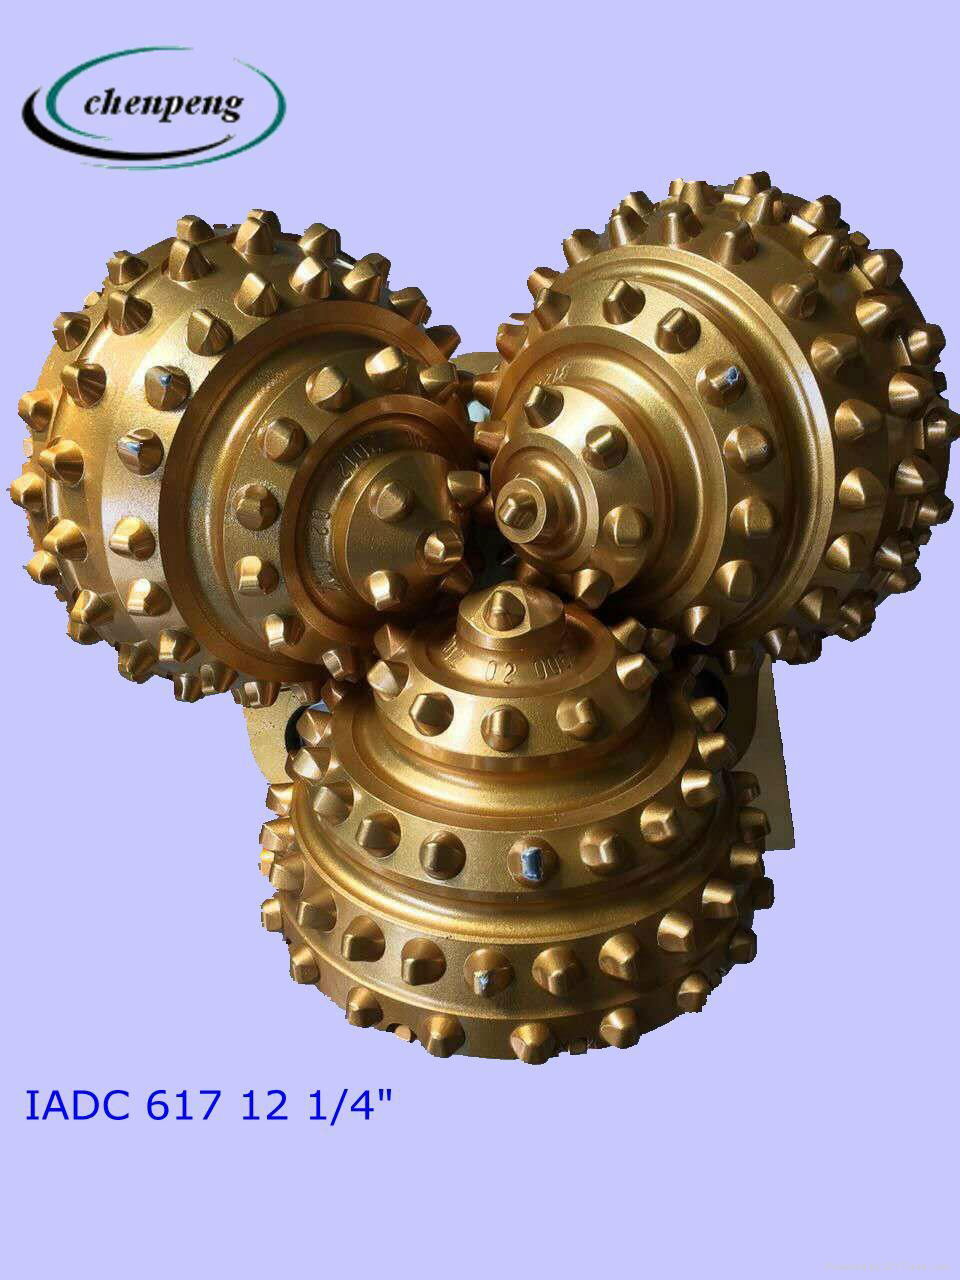 IADC617/647 12 1/4" TCI tricone drill bit for water well drilling 2